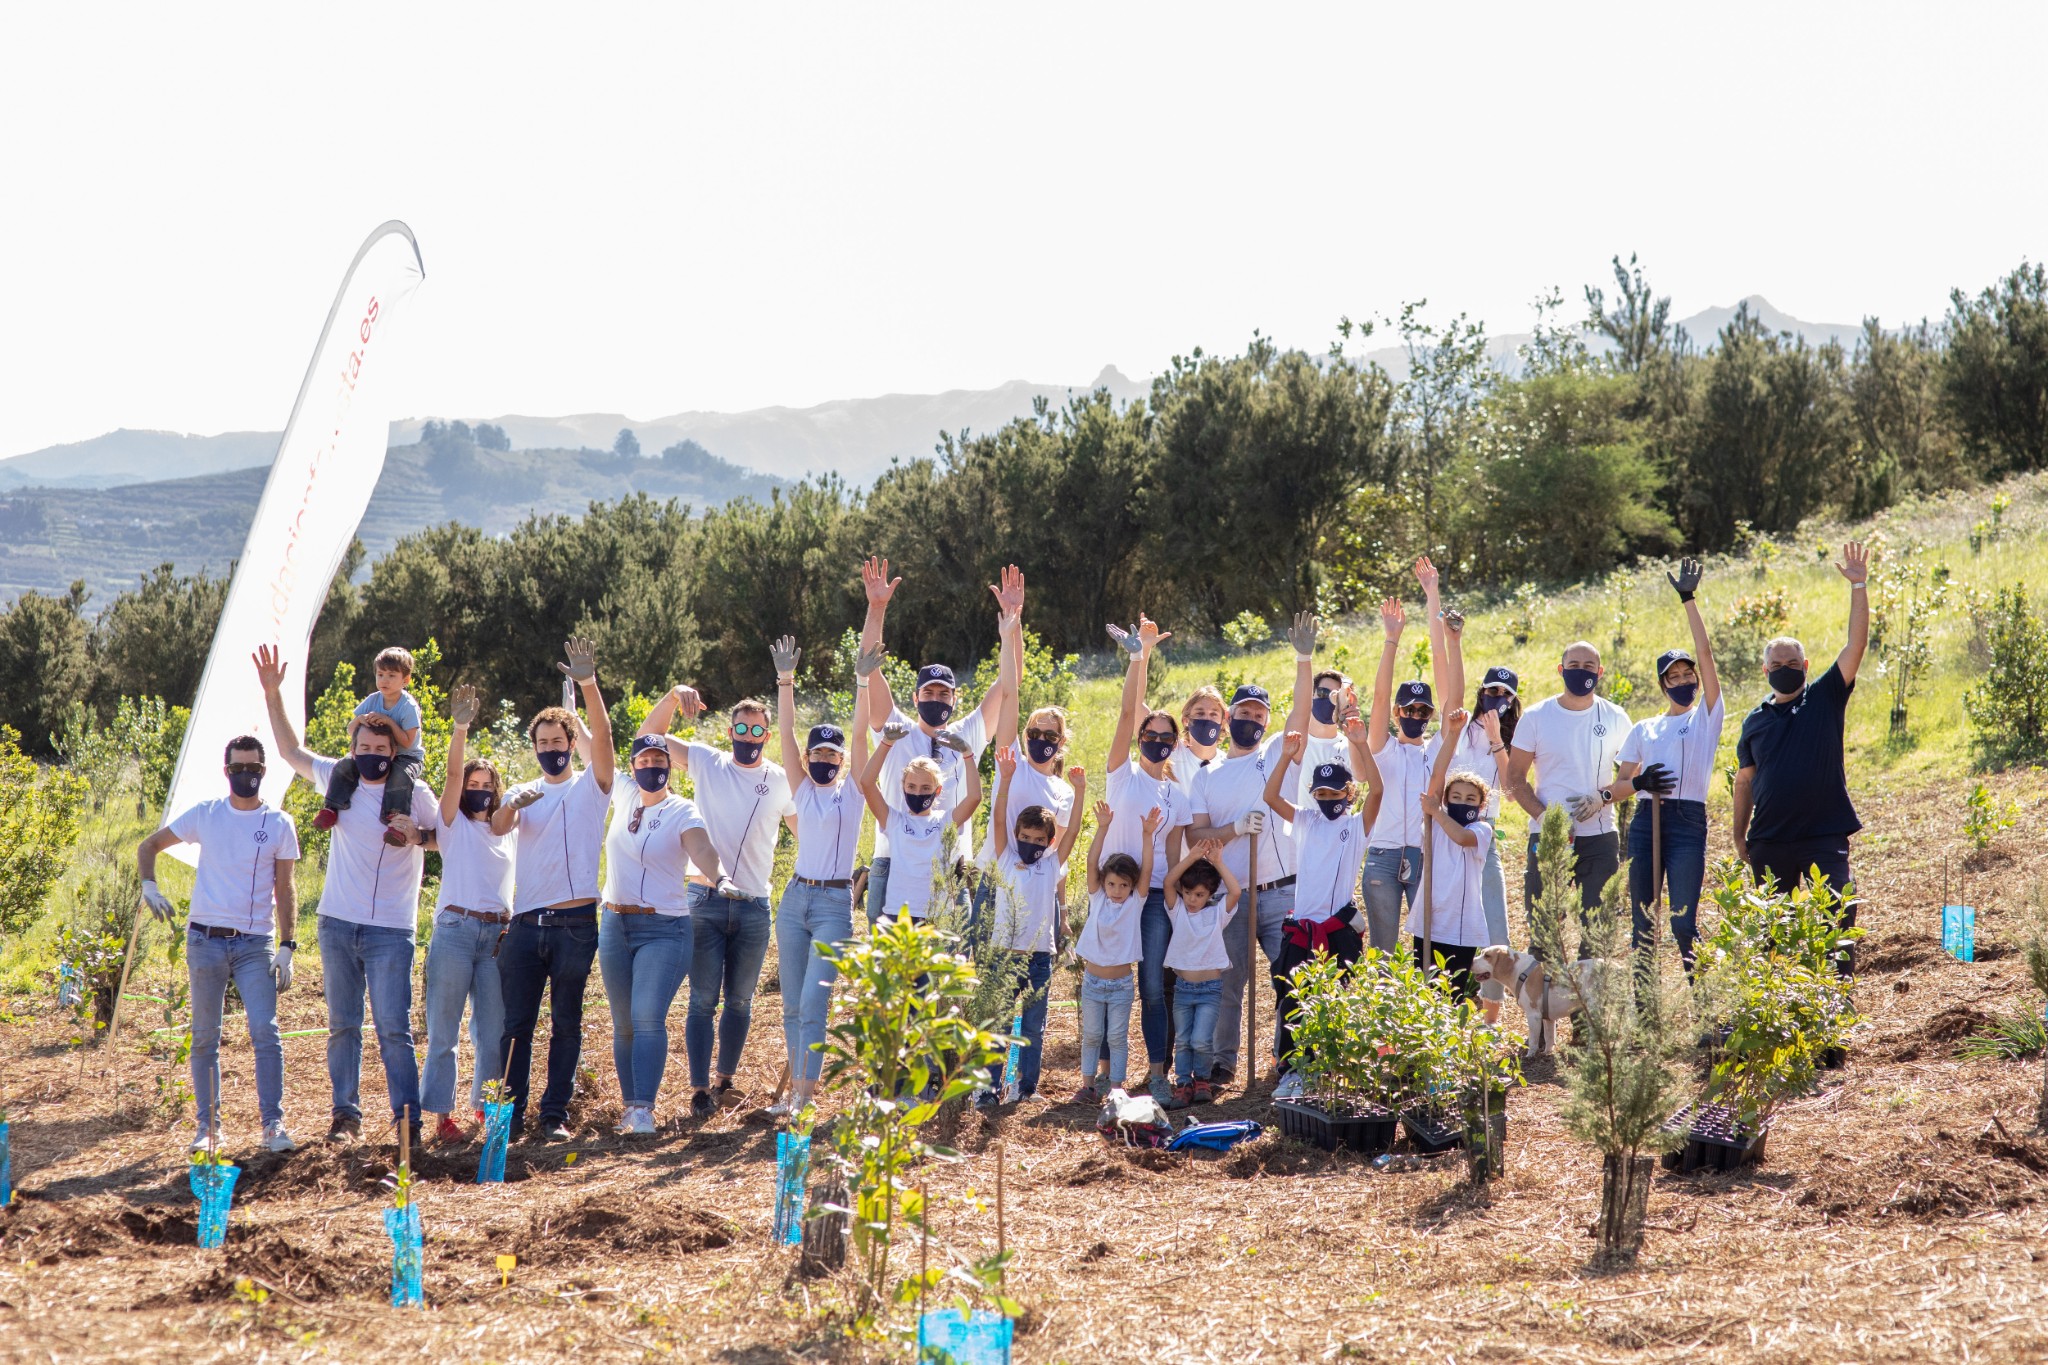 In collaboration with Foresta, Volkswagen Canarias is planting Canarian forests after the fire that hit Gran Canaria in 2019. With a total of 2,000 trees, the brand has contributed to reforesting laurel forests in the Canary Islands. Domingo Alonso Group, importer of the brand in the Canary Islands, has always shown its concern for the preservation of the environment and goes one step further with the donation of a chipping machine to help in the daily work of the Foresta Foundation and in prevention tasks.